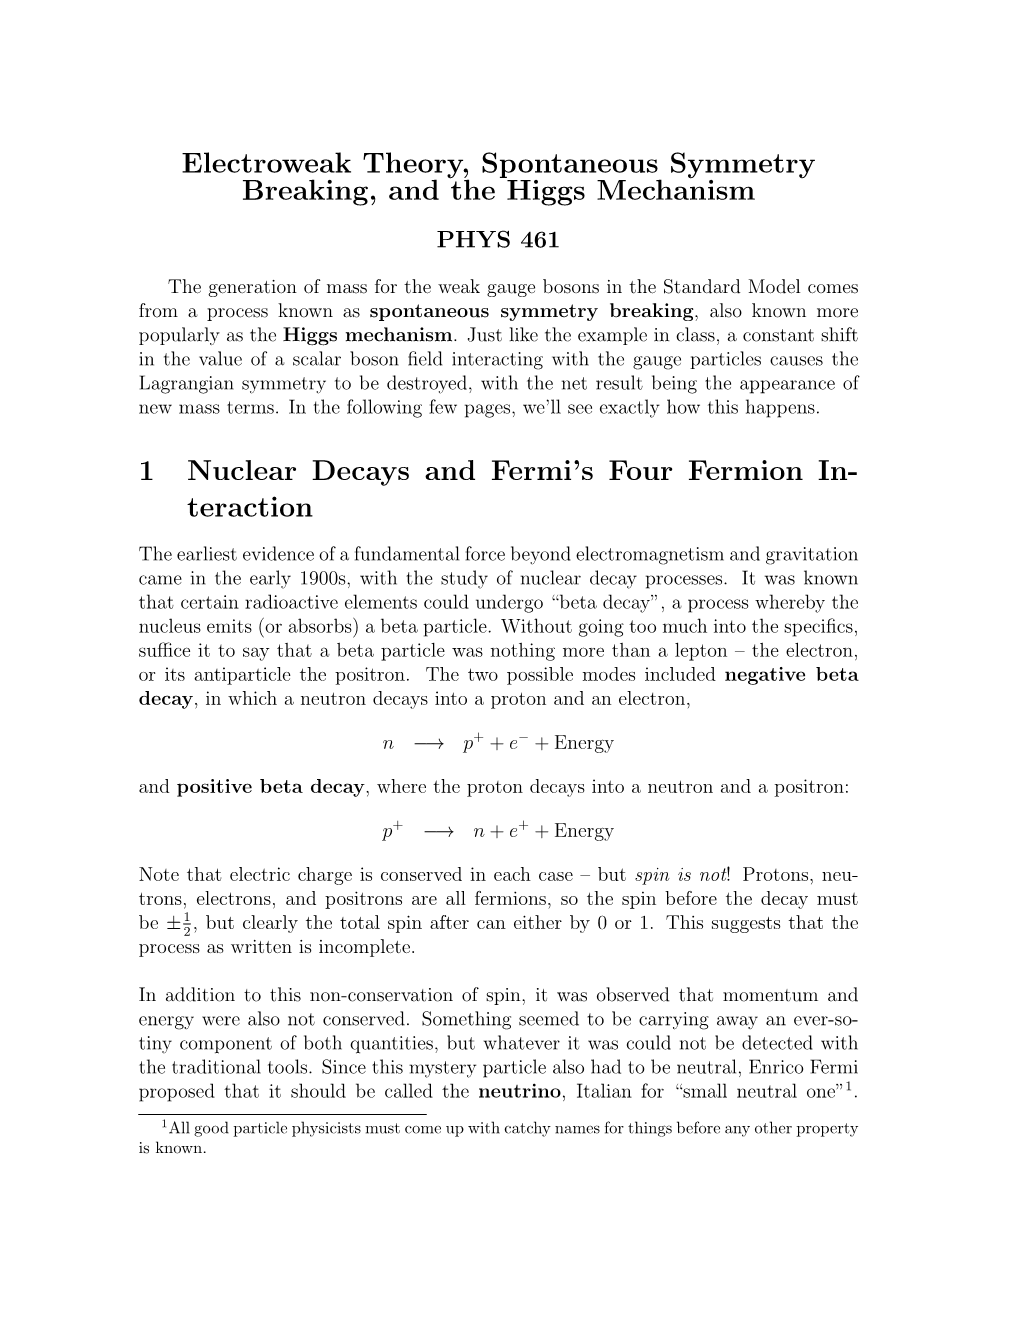 Electroweak Theory, Spontaneous Symmetry Breaking, and the Higgs Mechanism PHYS 461